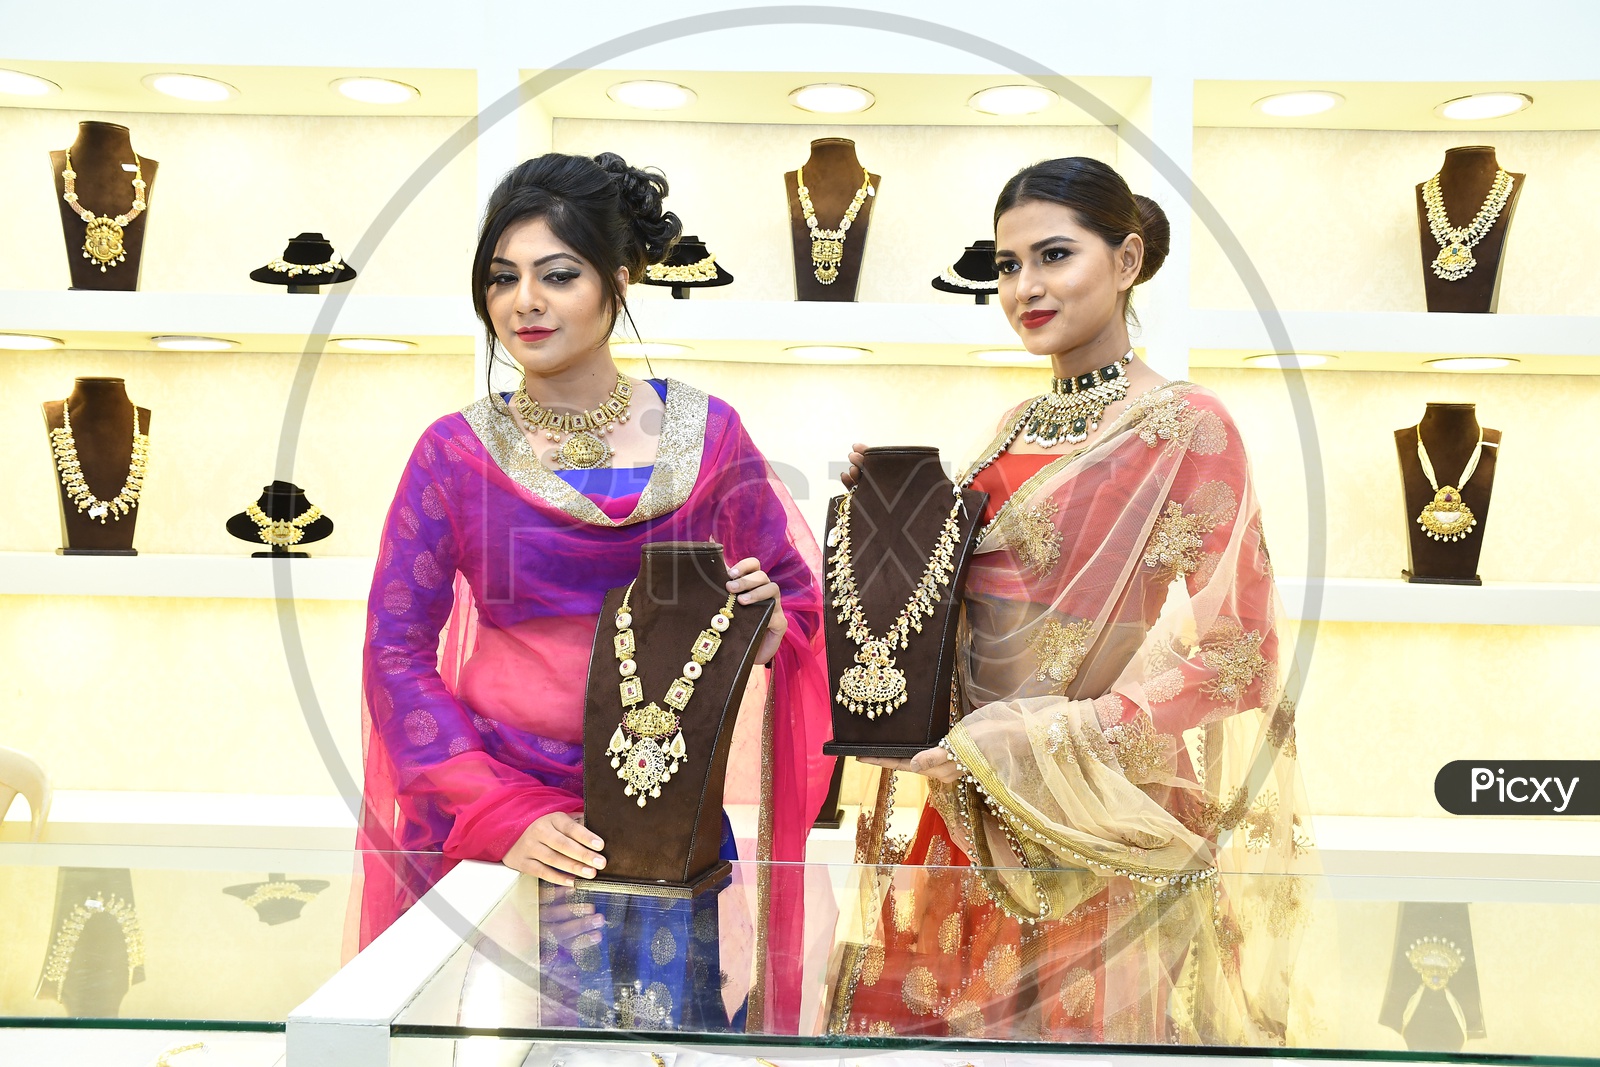 Female Models showcasing the Necklace sets in the Mart